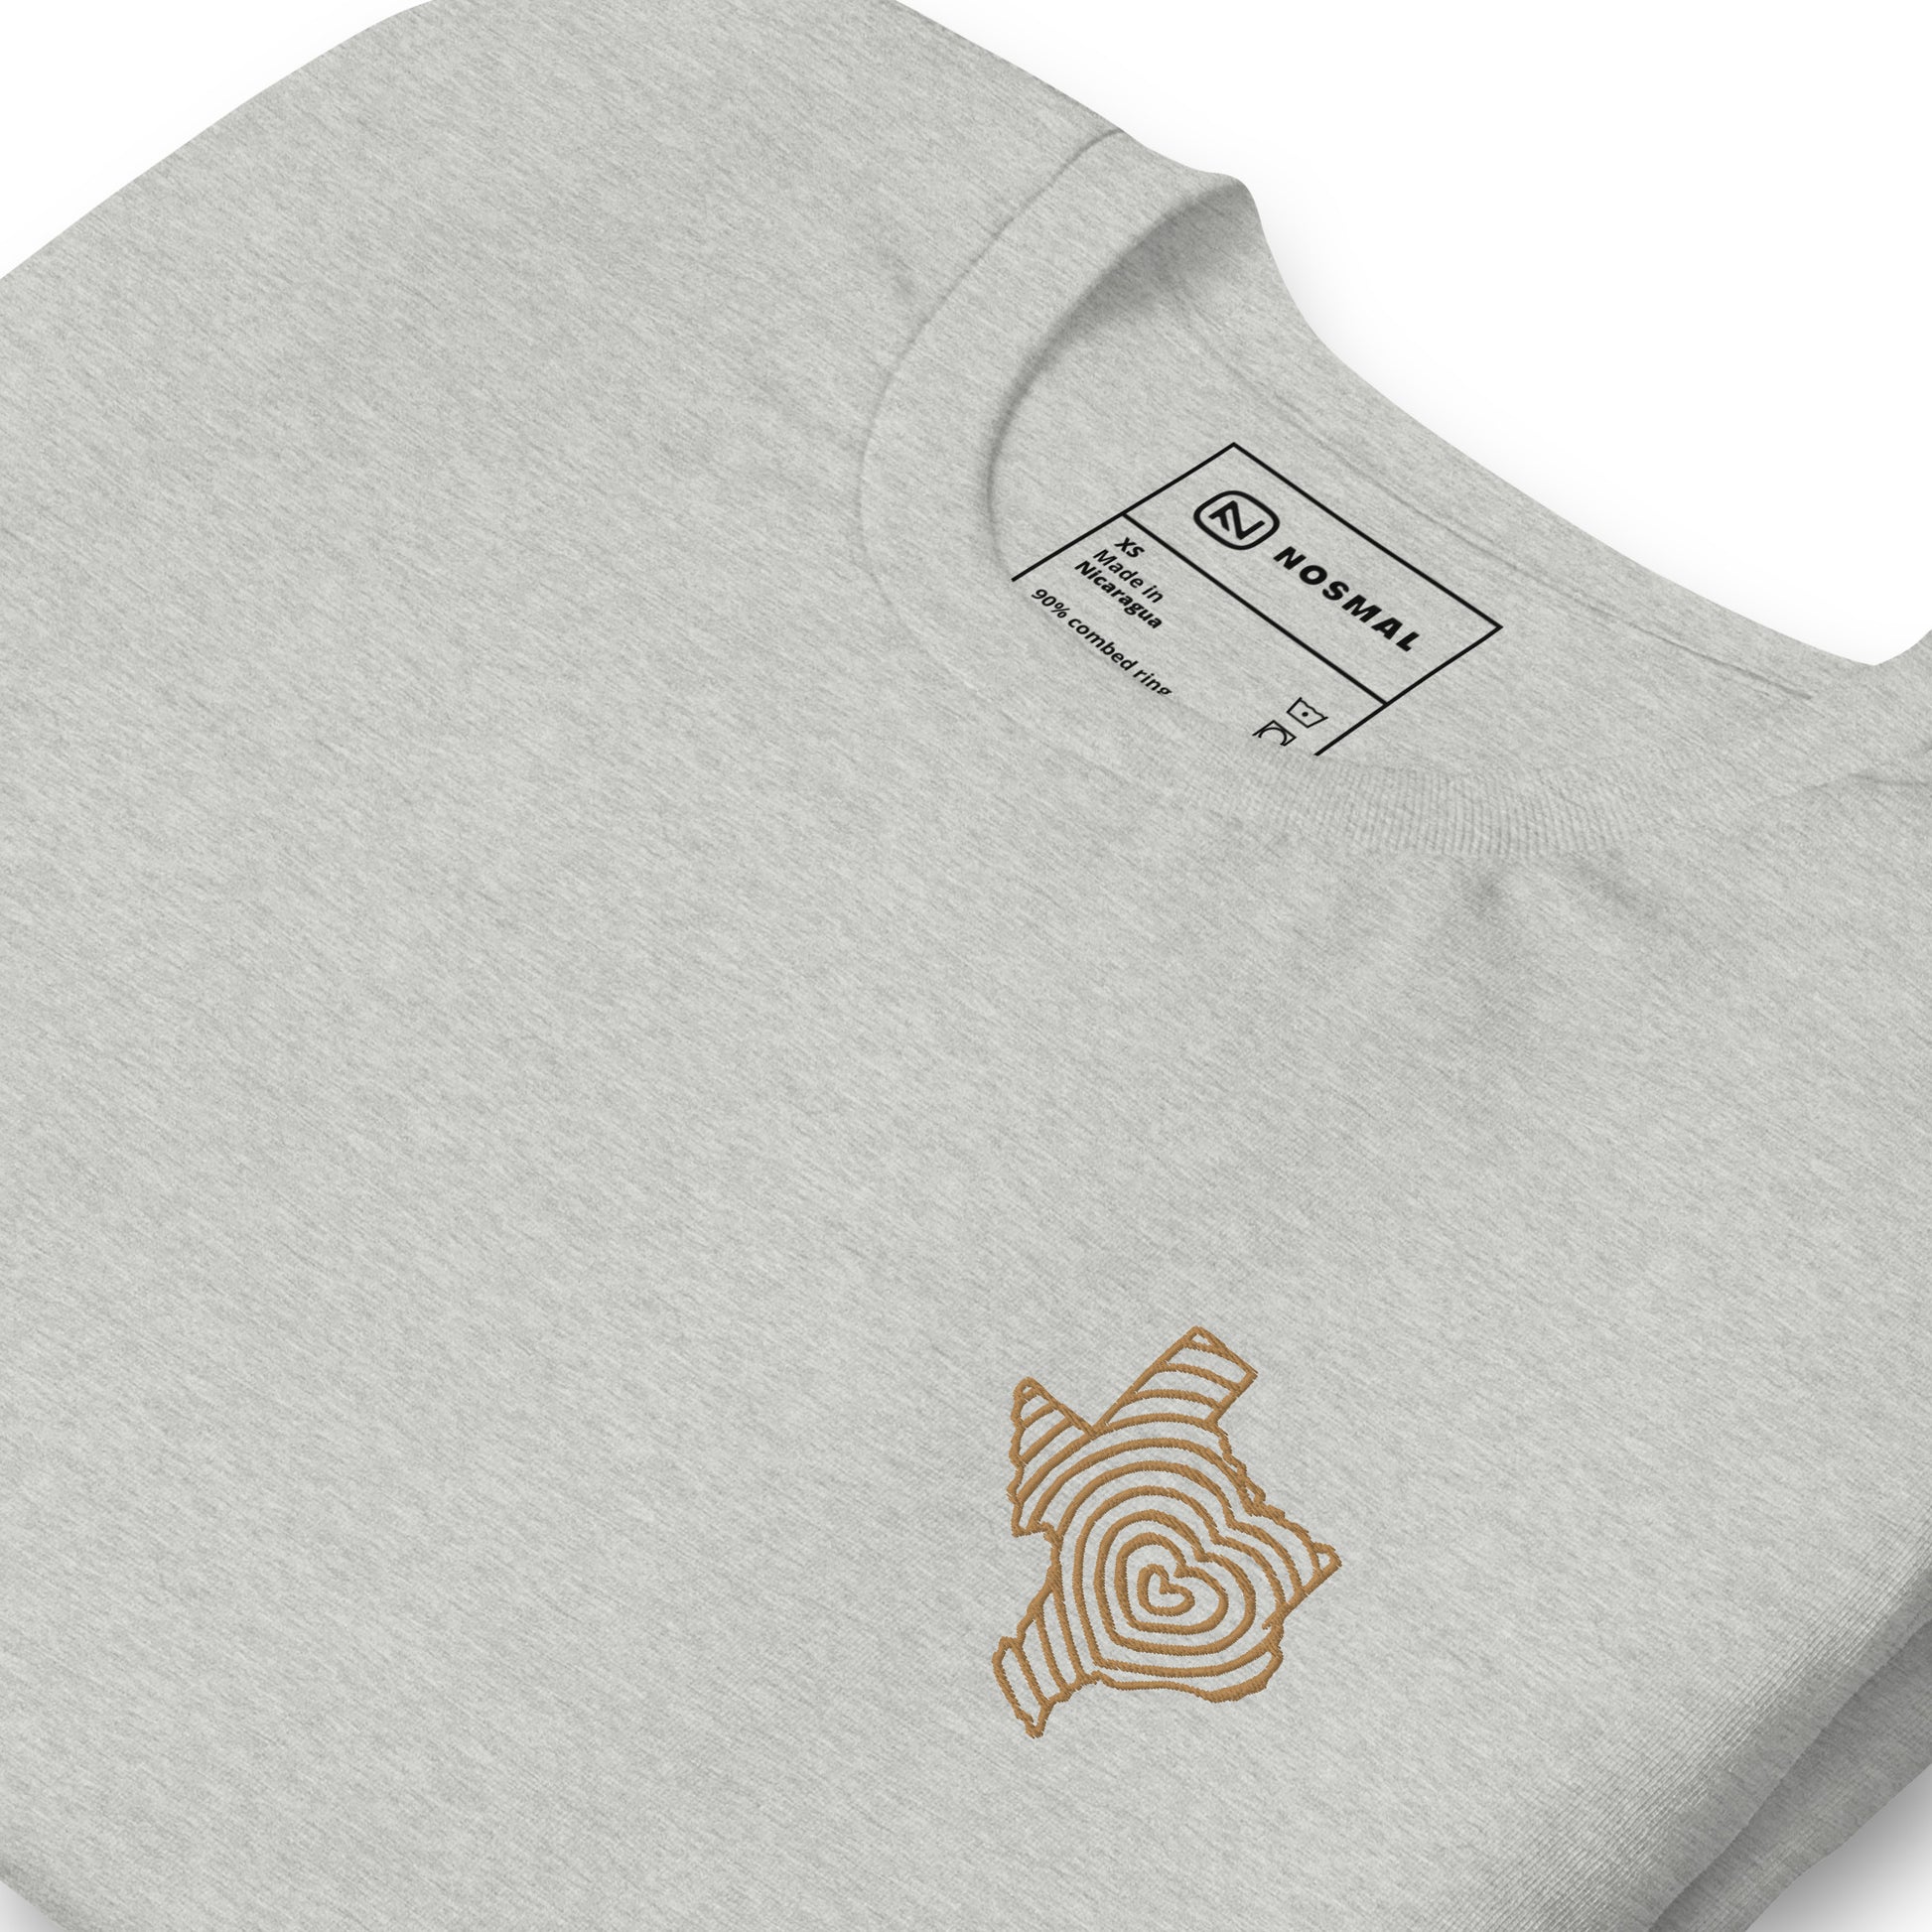 Angled close up shot of heartbeat of texas gold embroidered design on heather athletic grey unisex t-shirt.